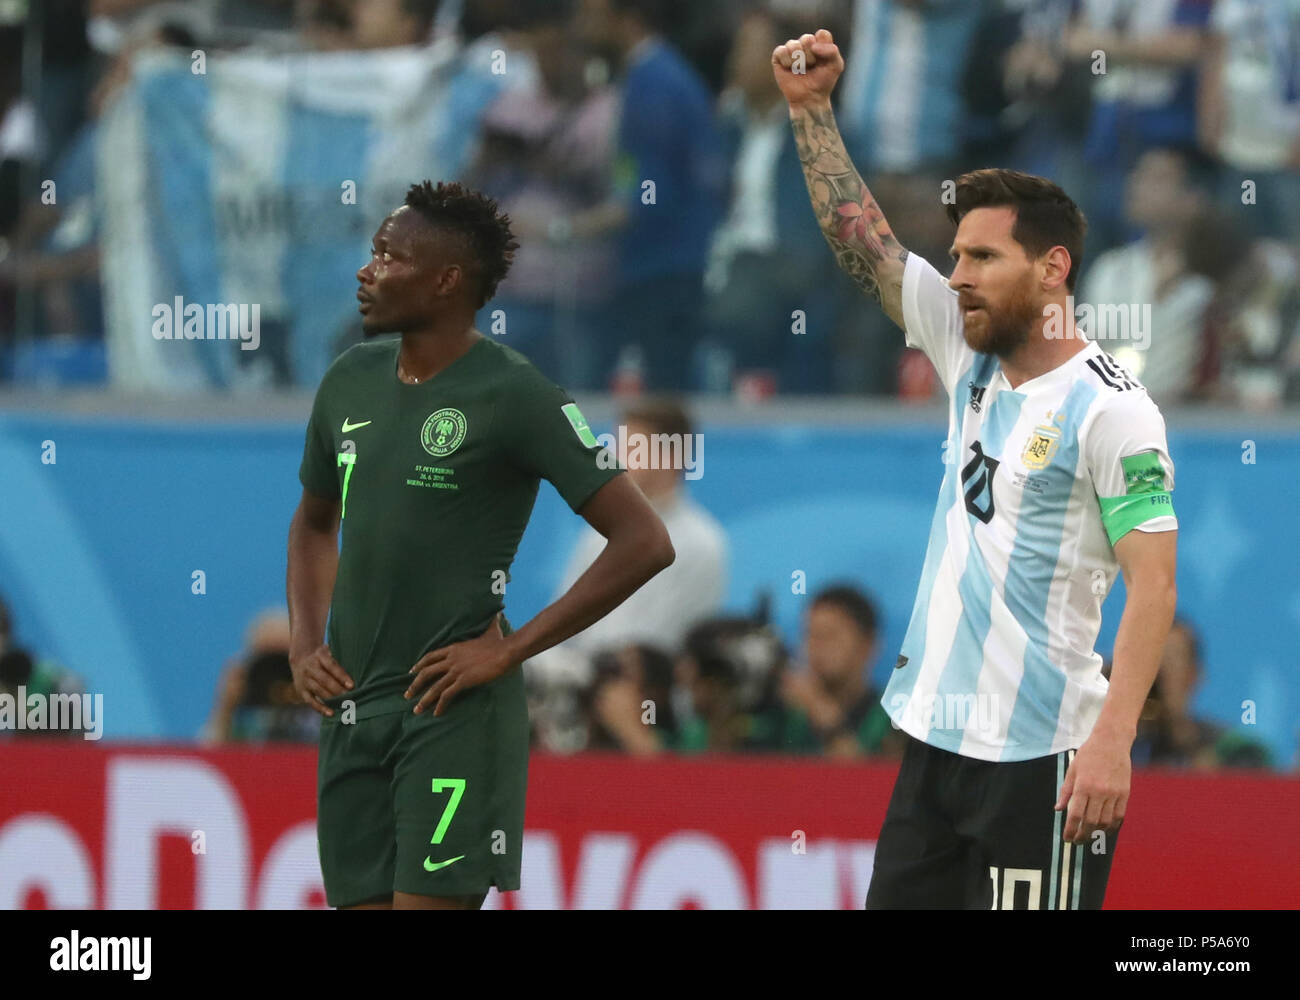 Moscow, Russia. 26th June, 2018. Soccer, World Cup 2018, Preliminary round, Group D, 3rd game day, Nigeria vs Argentina at the St. Petersburg Stadium: Argentina's Lionel Messi celebrates his 0-1 goal beside Nigeria's Ahmed Musa. Credit: Cezaro De Luca/dpa/Alamy Live News Stock Photo